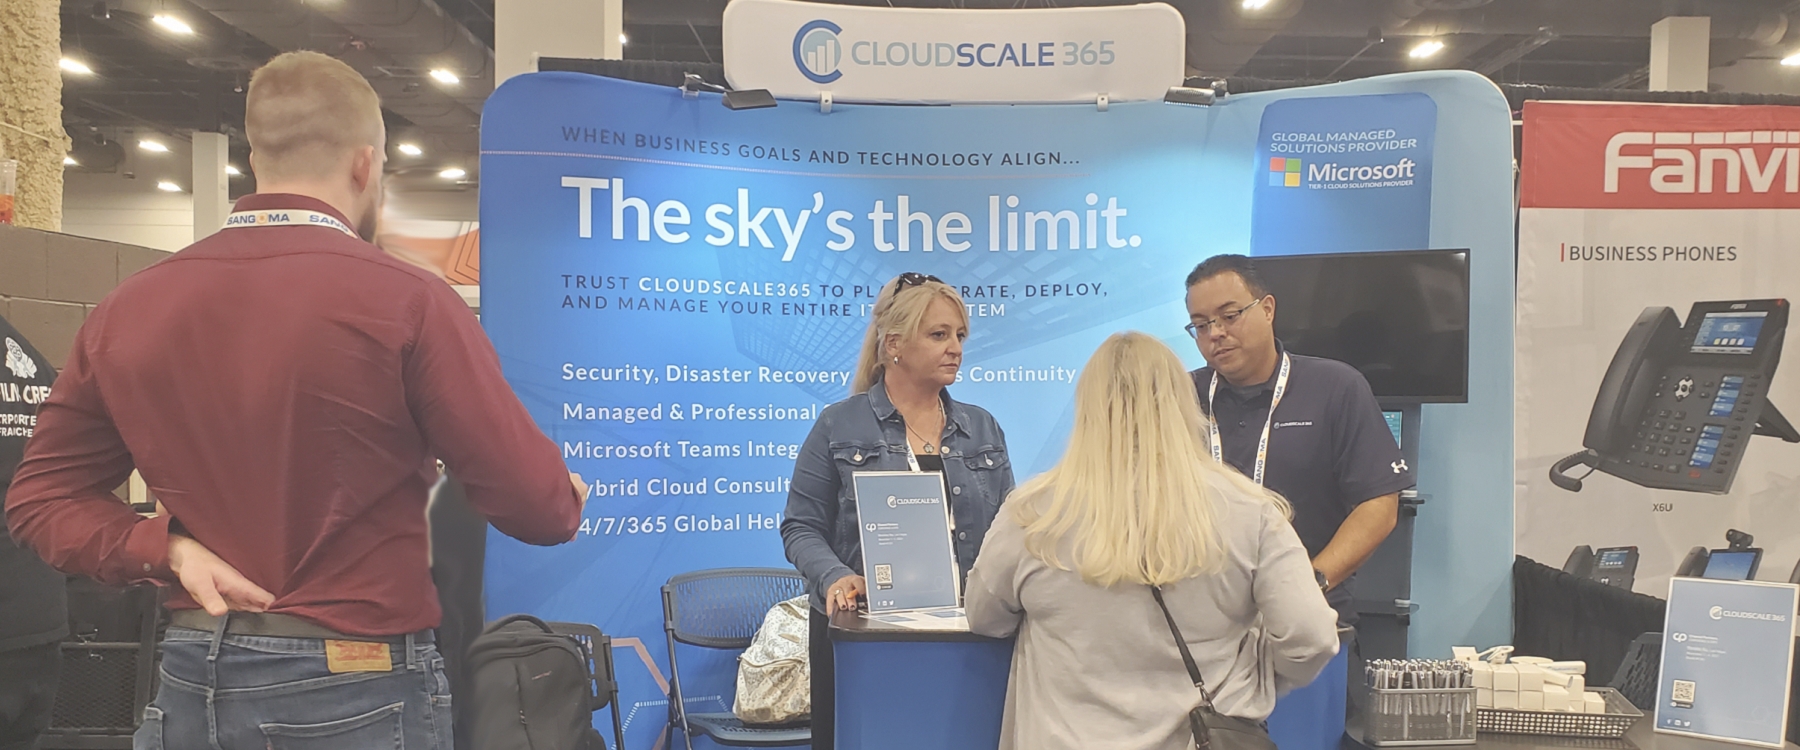 CloudScale365 Exhibiting at Channel Partners 2021